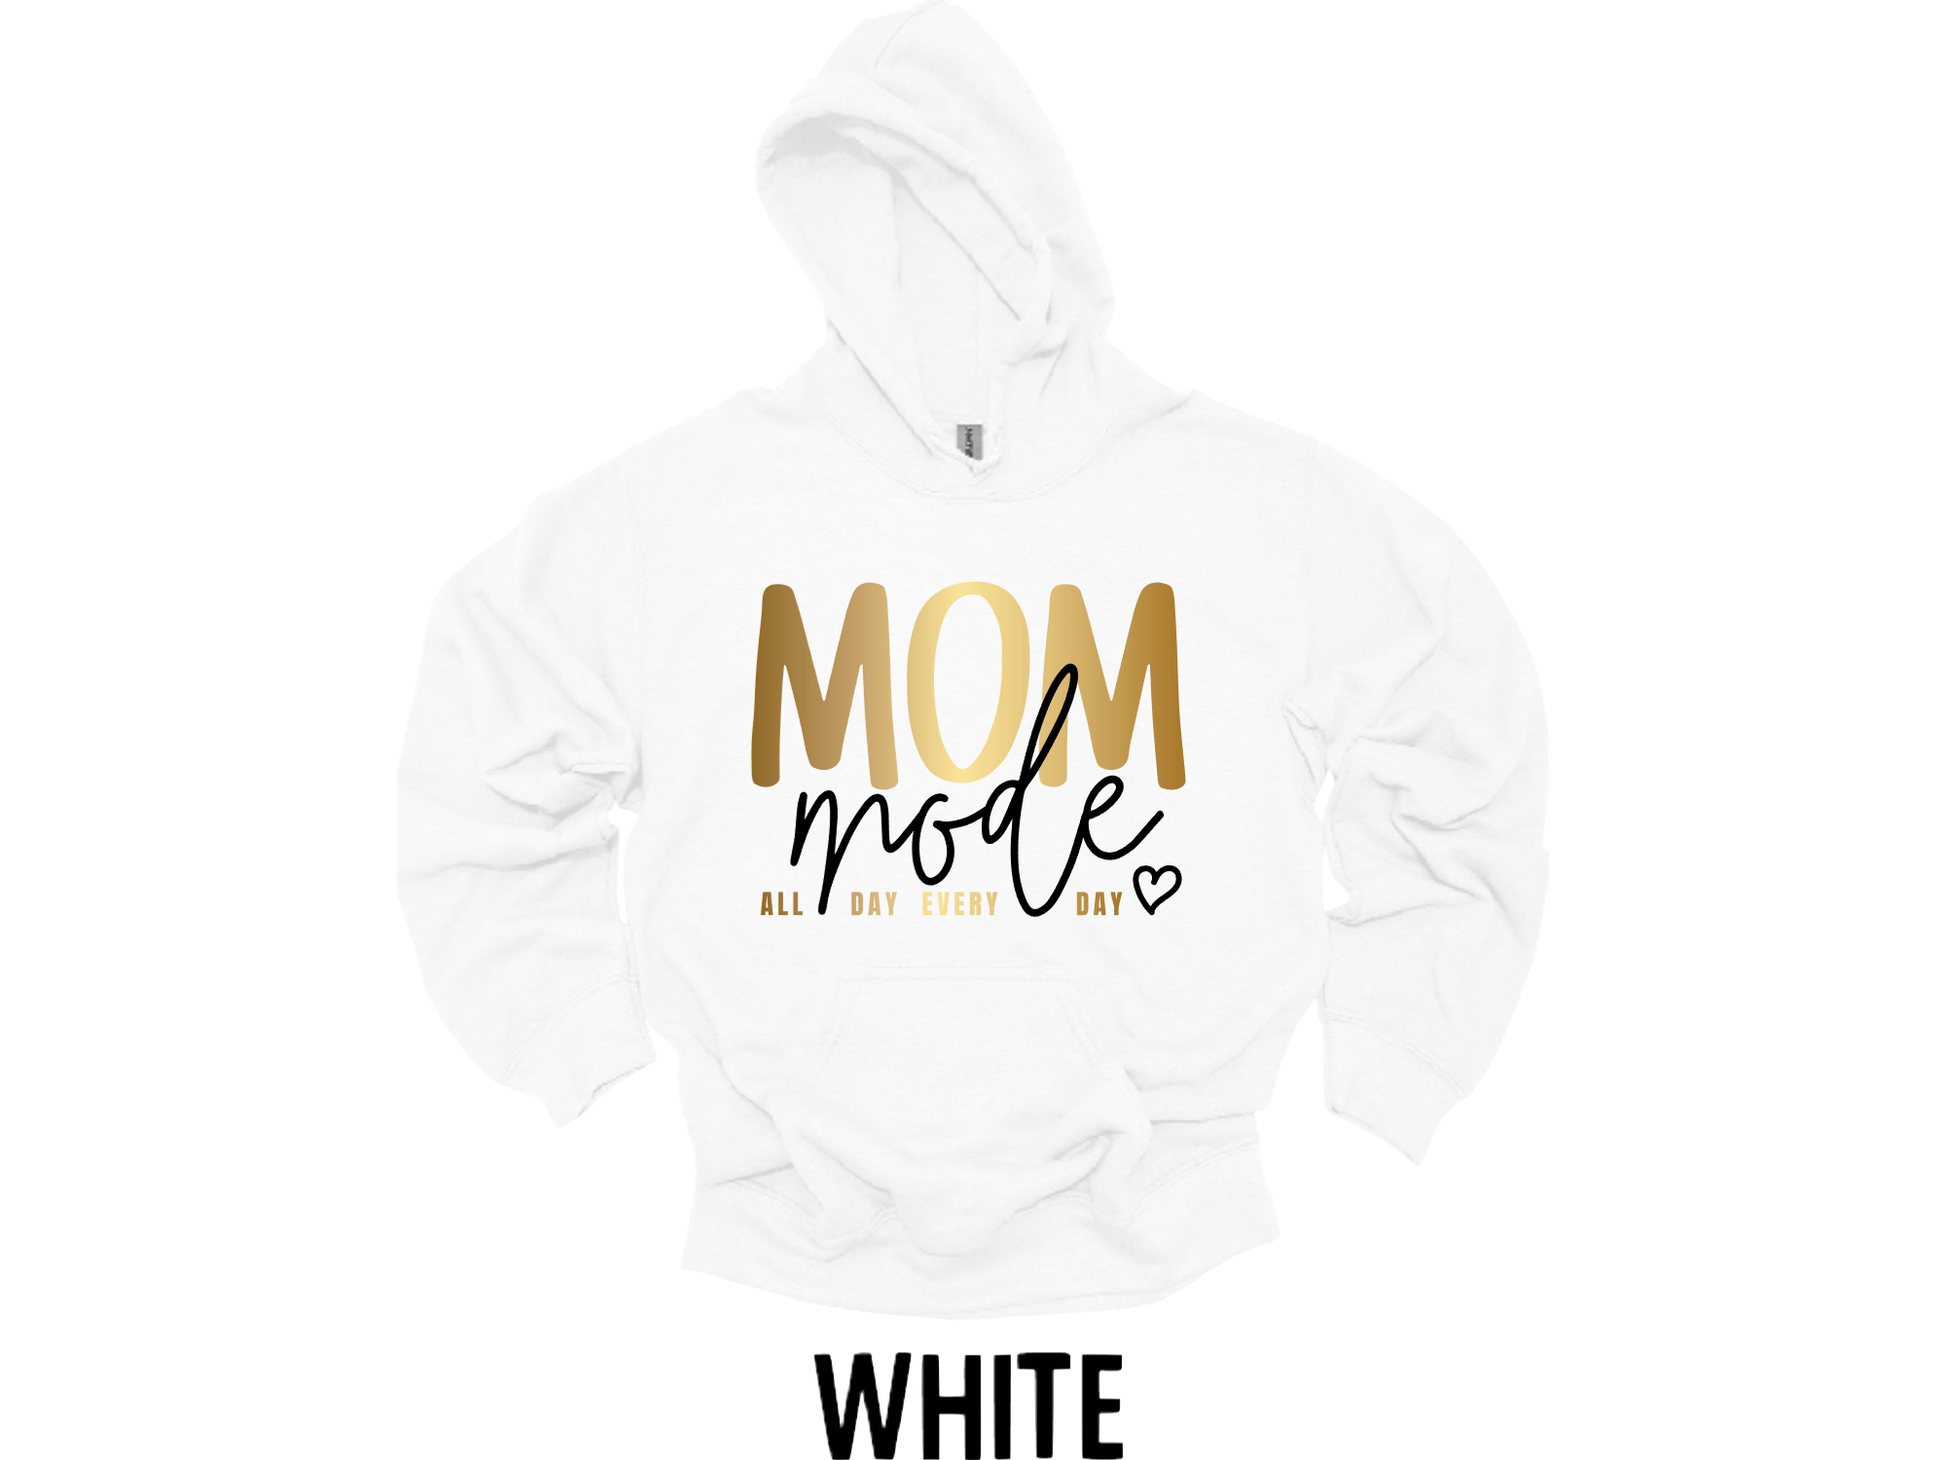 Mom mode all day everyday t-shirt or hoodie (New Arrival) - smuniqueshirts